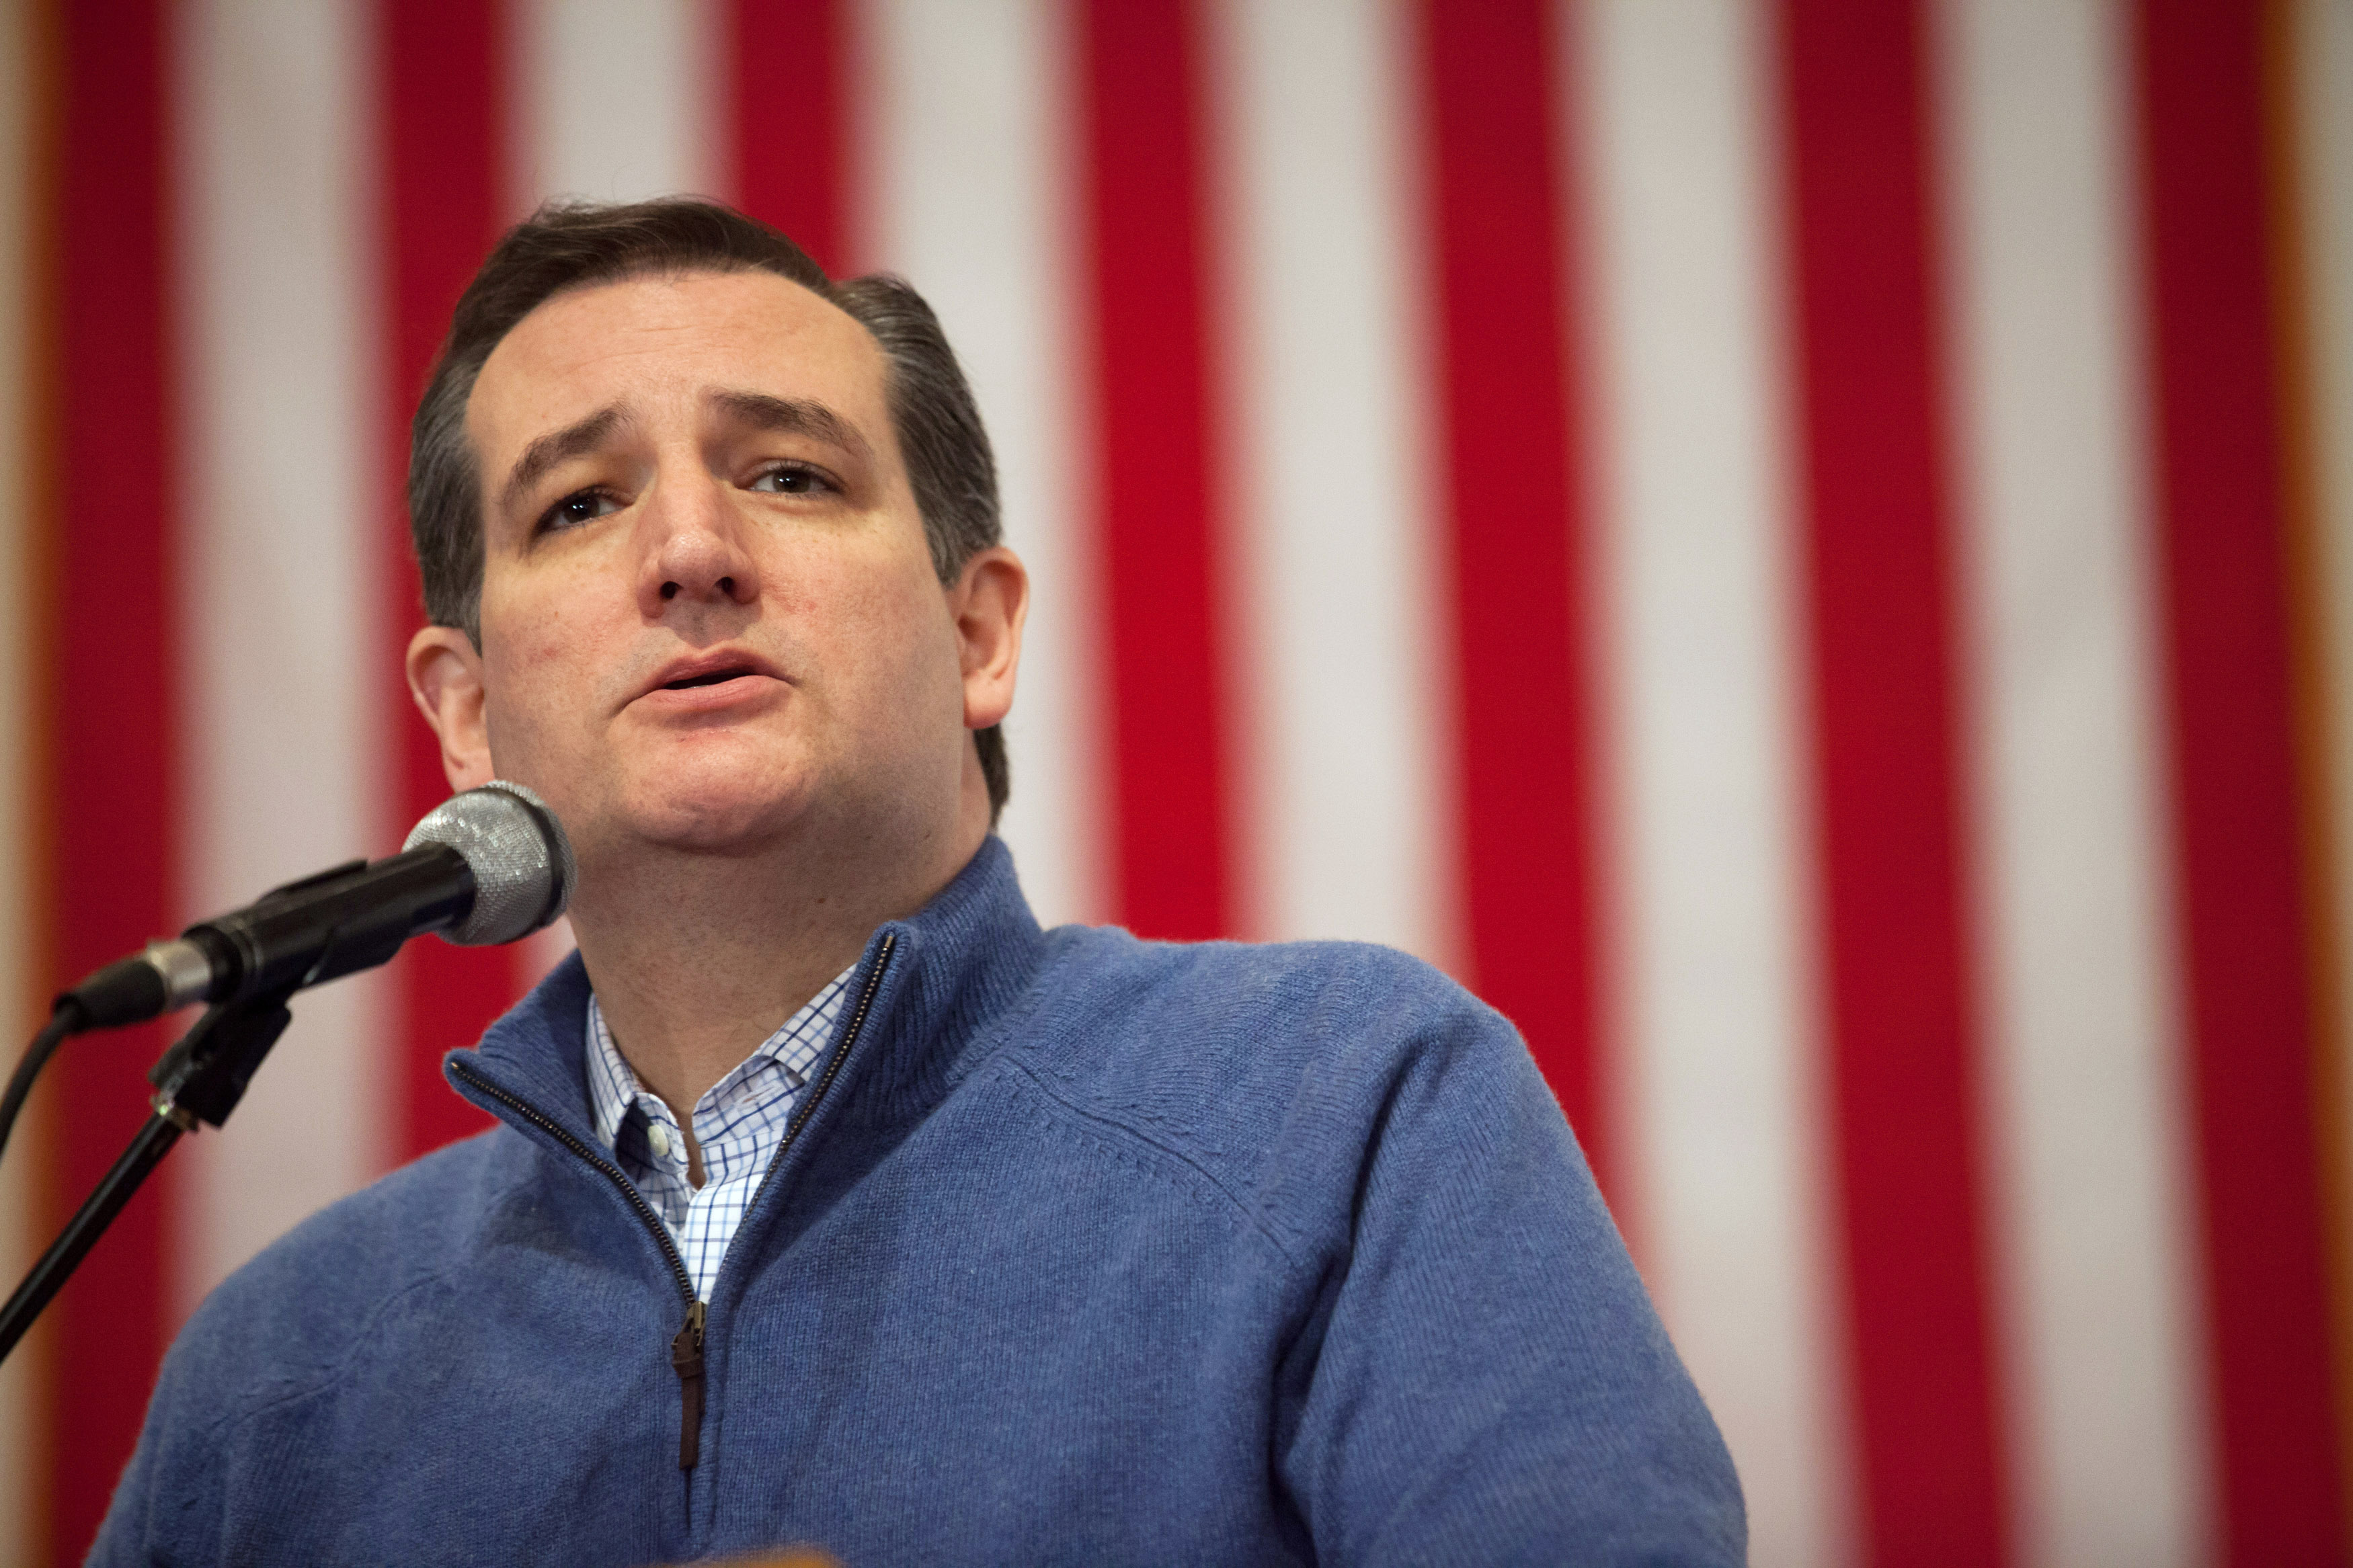 Will Ted Cruz Win The New Hampshire Primary? The Polls Are Not In His Favor3500 x 2333